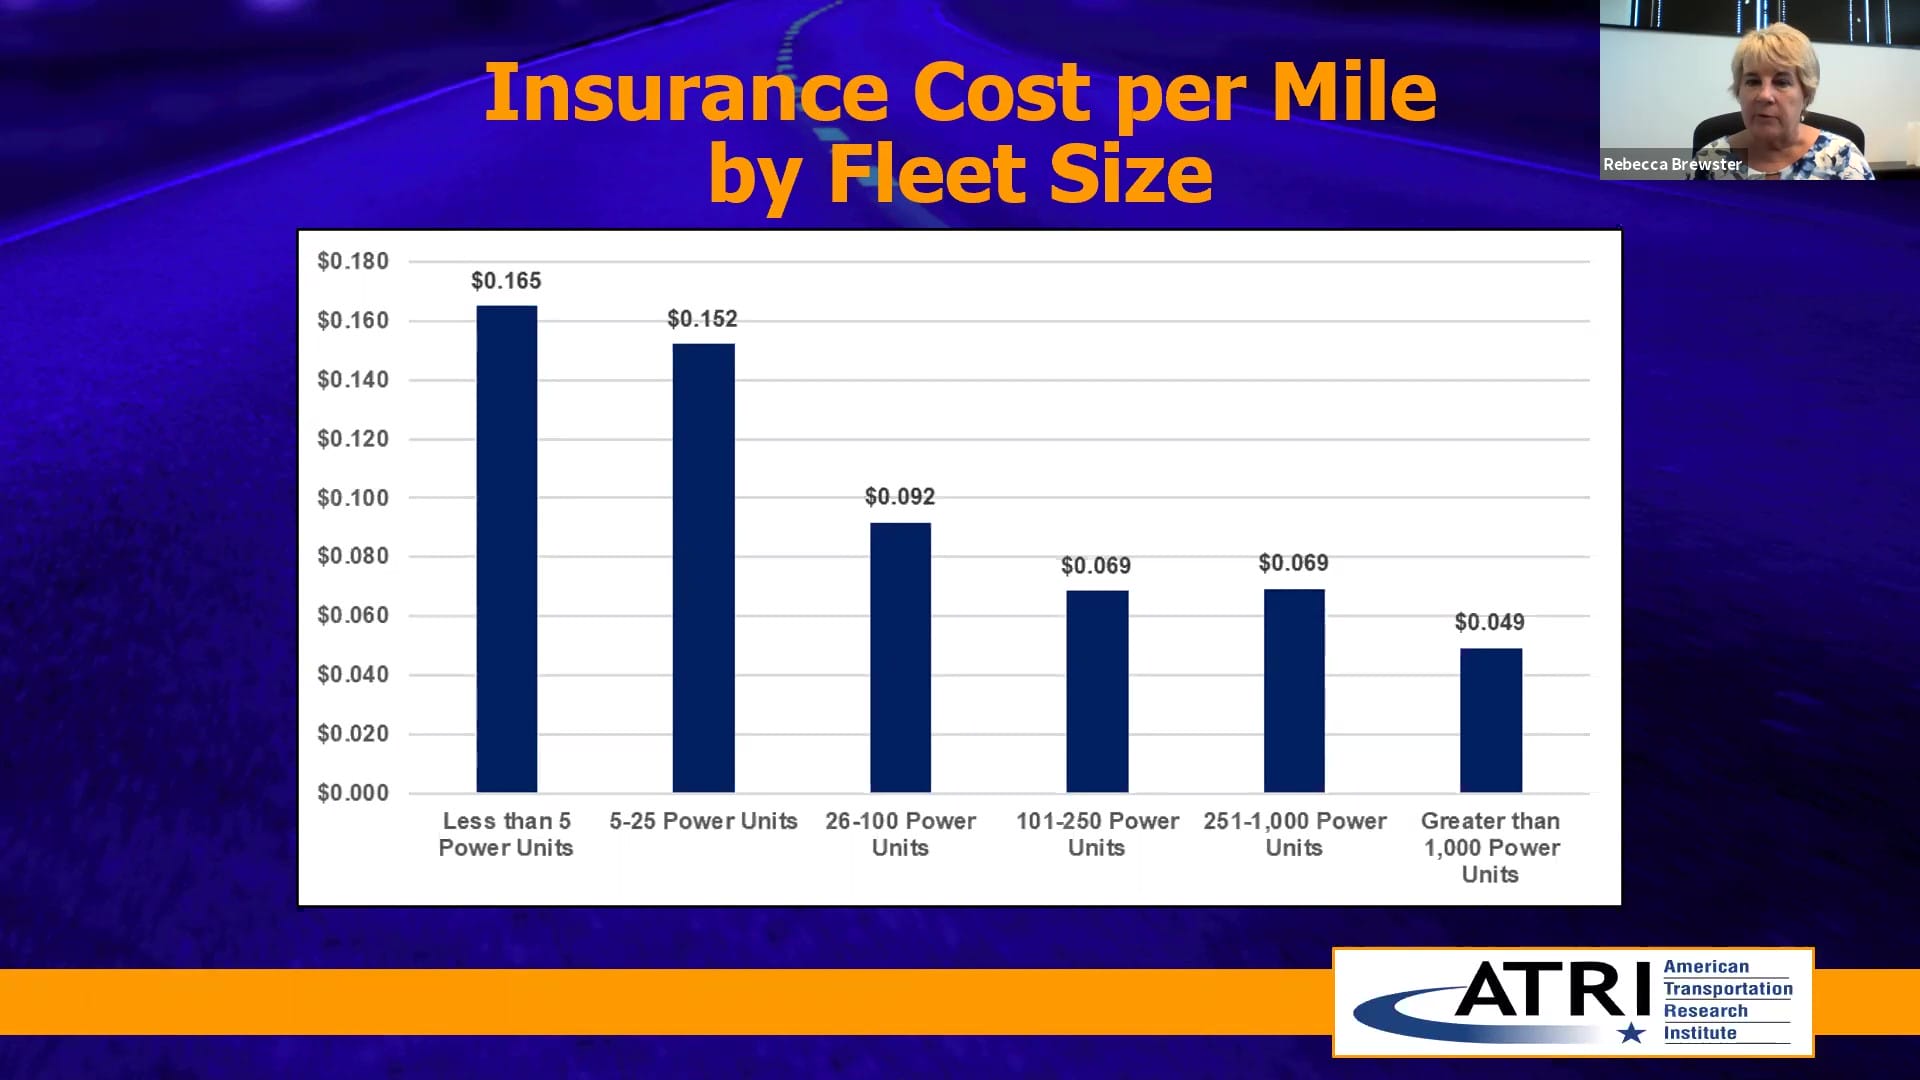 Trucking Industry Concerns 2020 from ATRI Insurance Costs Per Mile